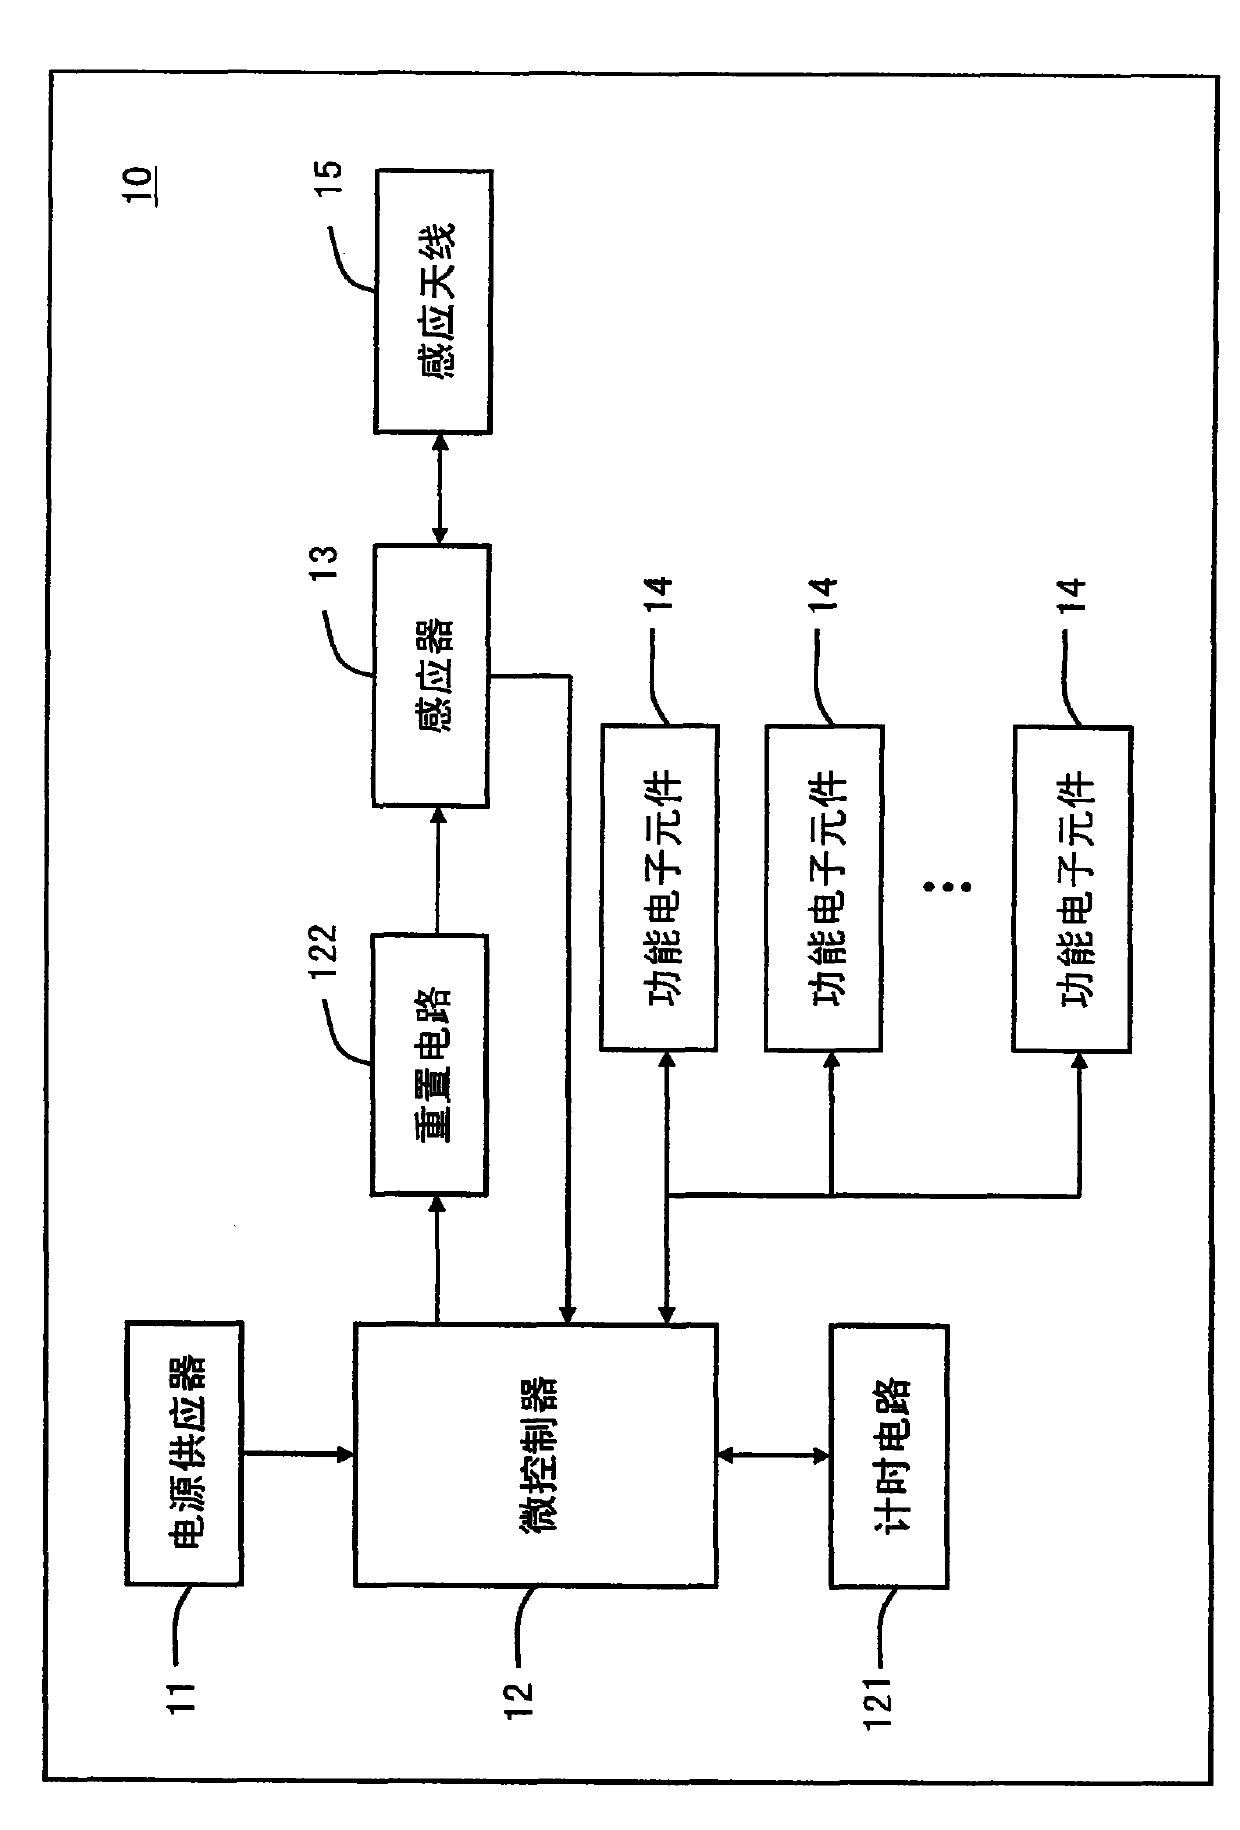 Electricity-saving managing method and system for computer peripheral devices